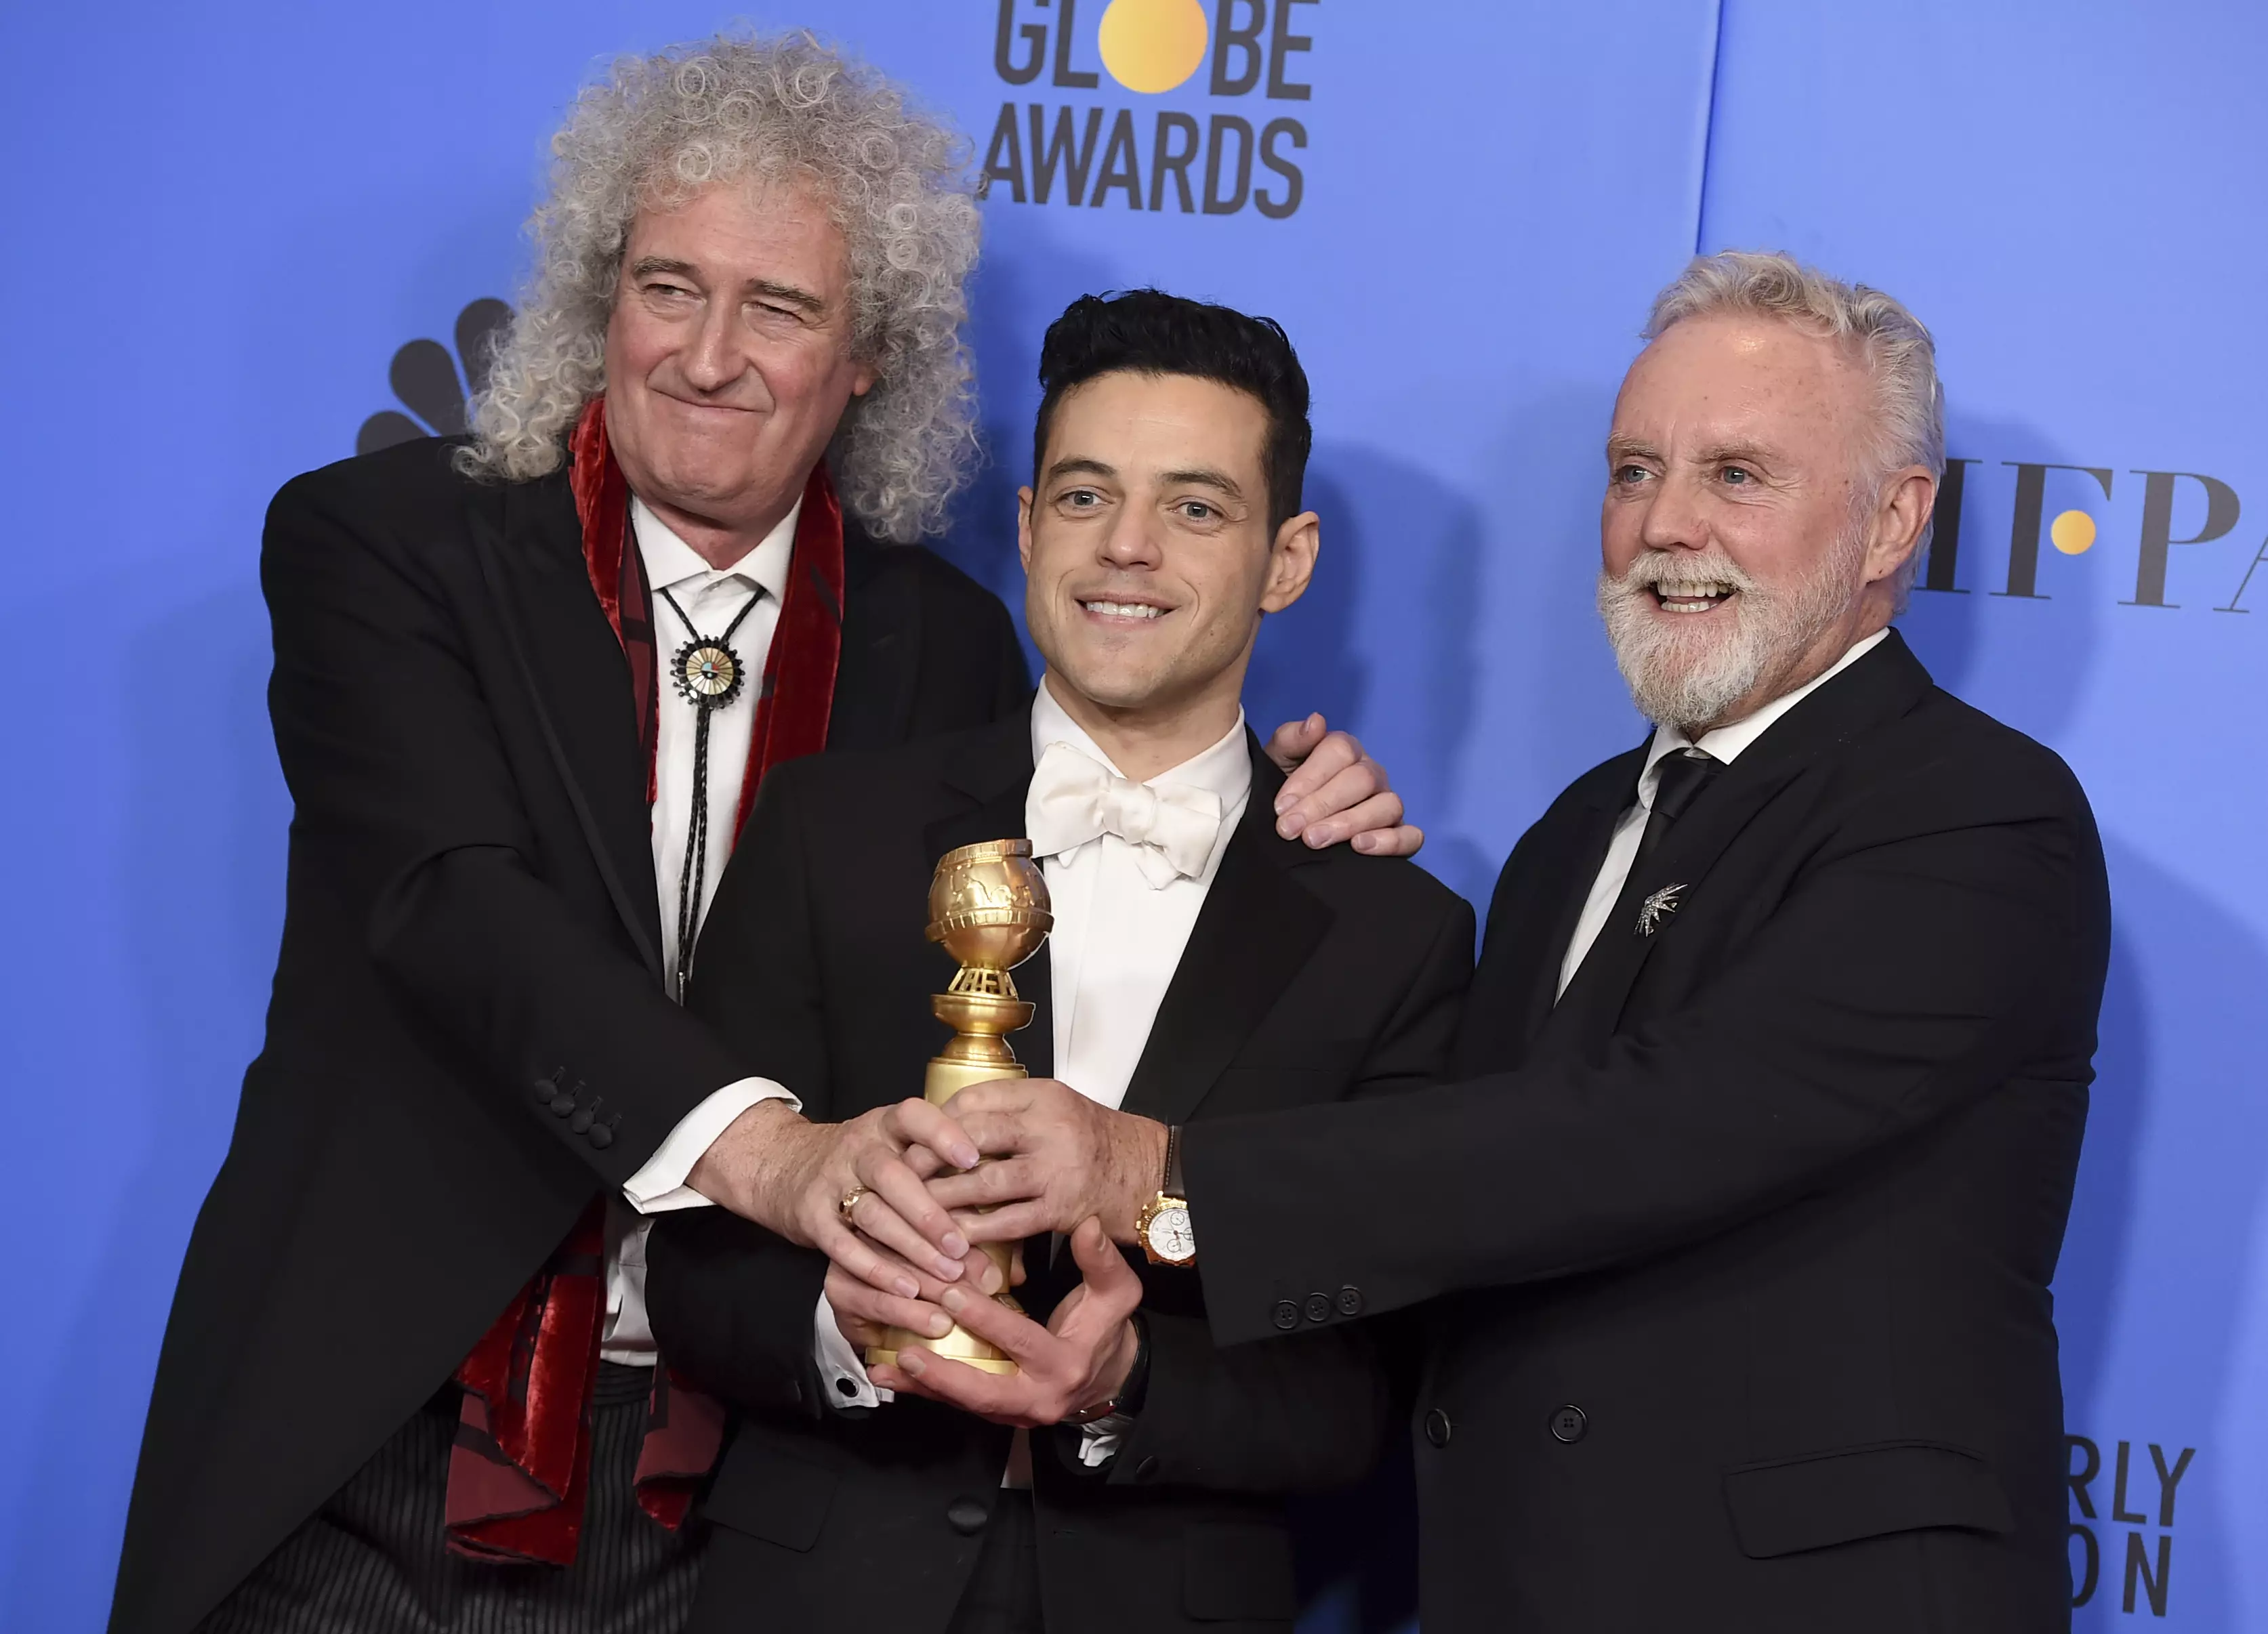 Queen guitarist Brian May, actor Rami Malek and drummer Roger Taylor.